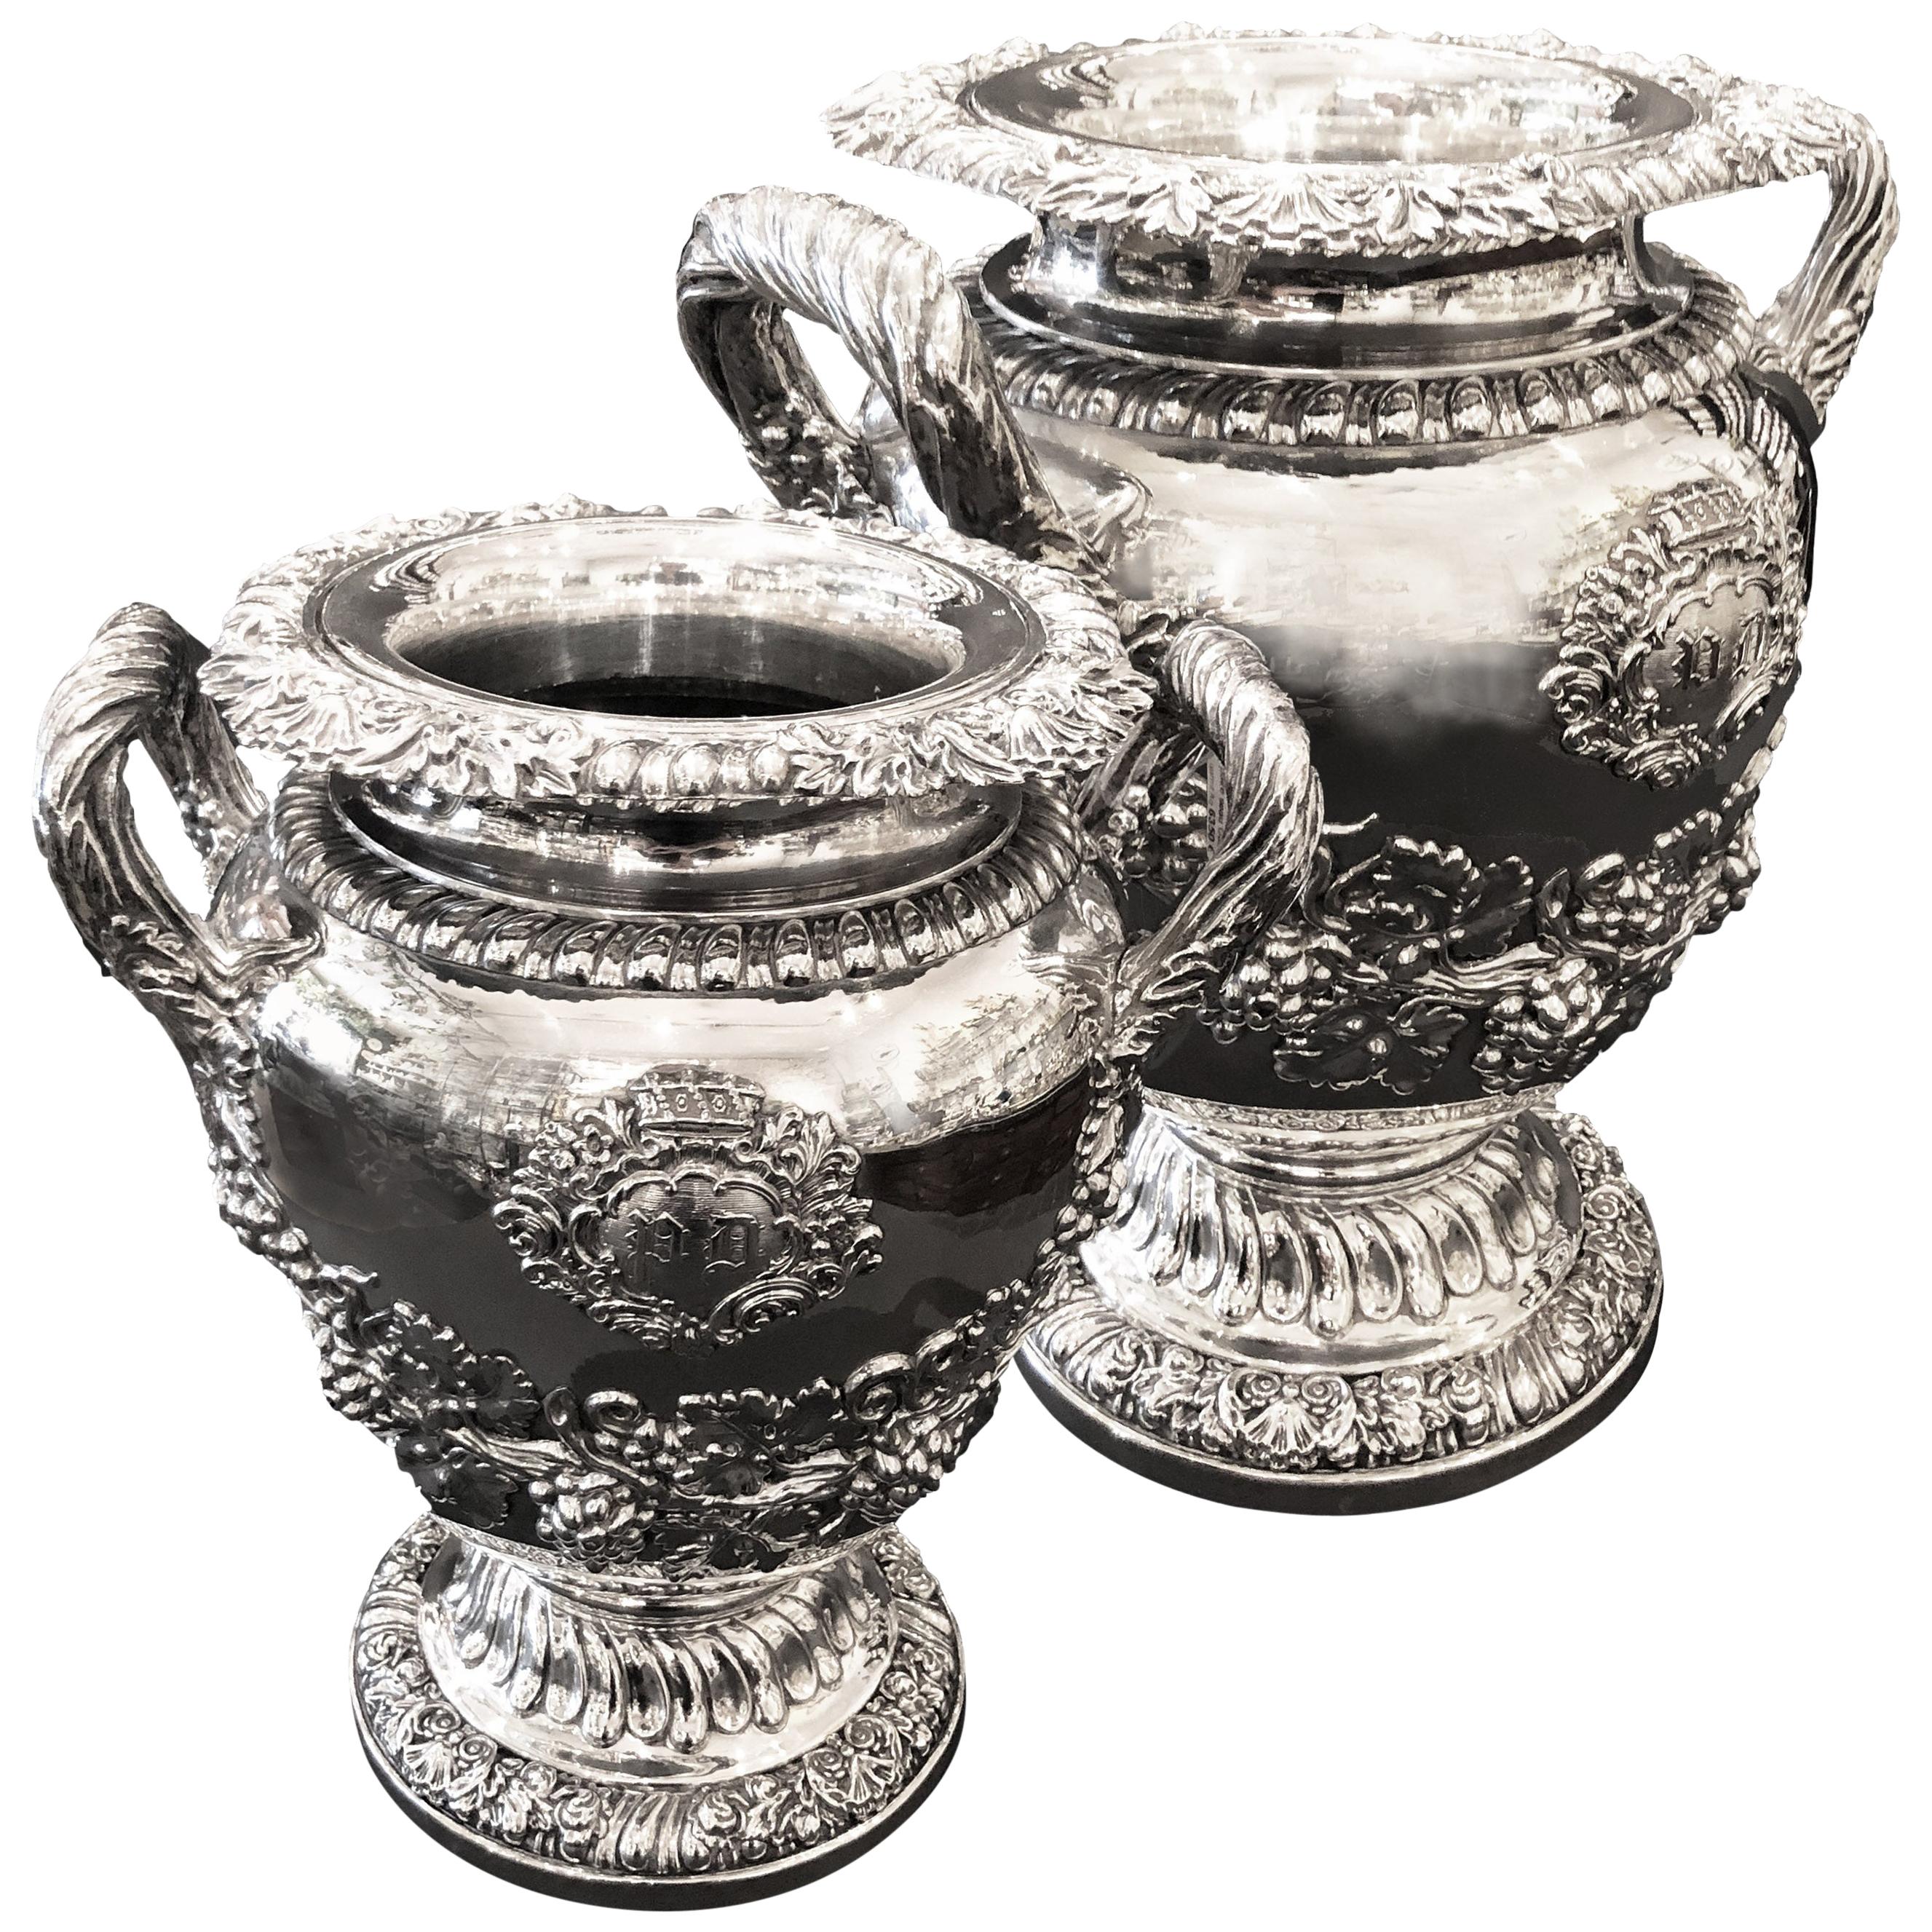 19th Century Pair of Wine Coolers from French Famous Odiot Silversmith